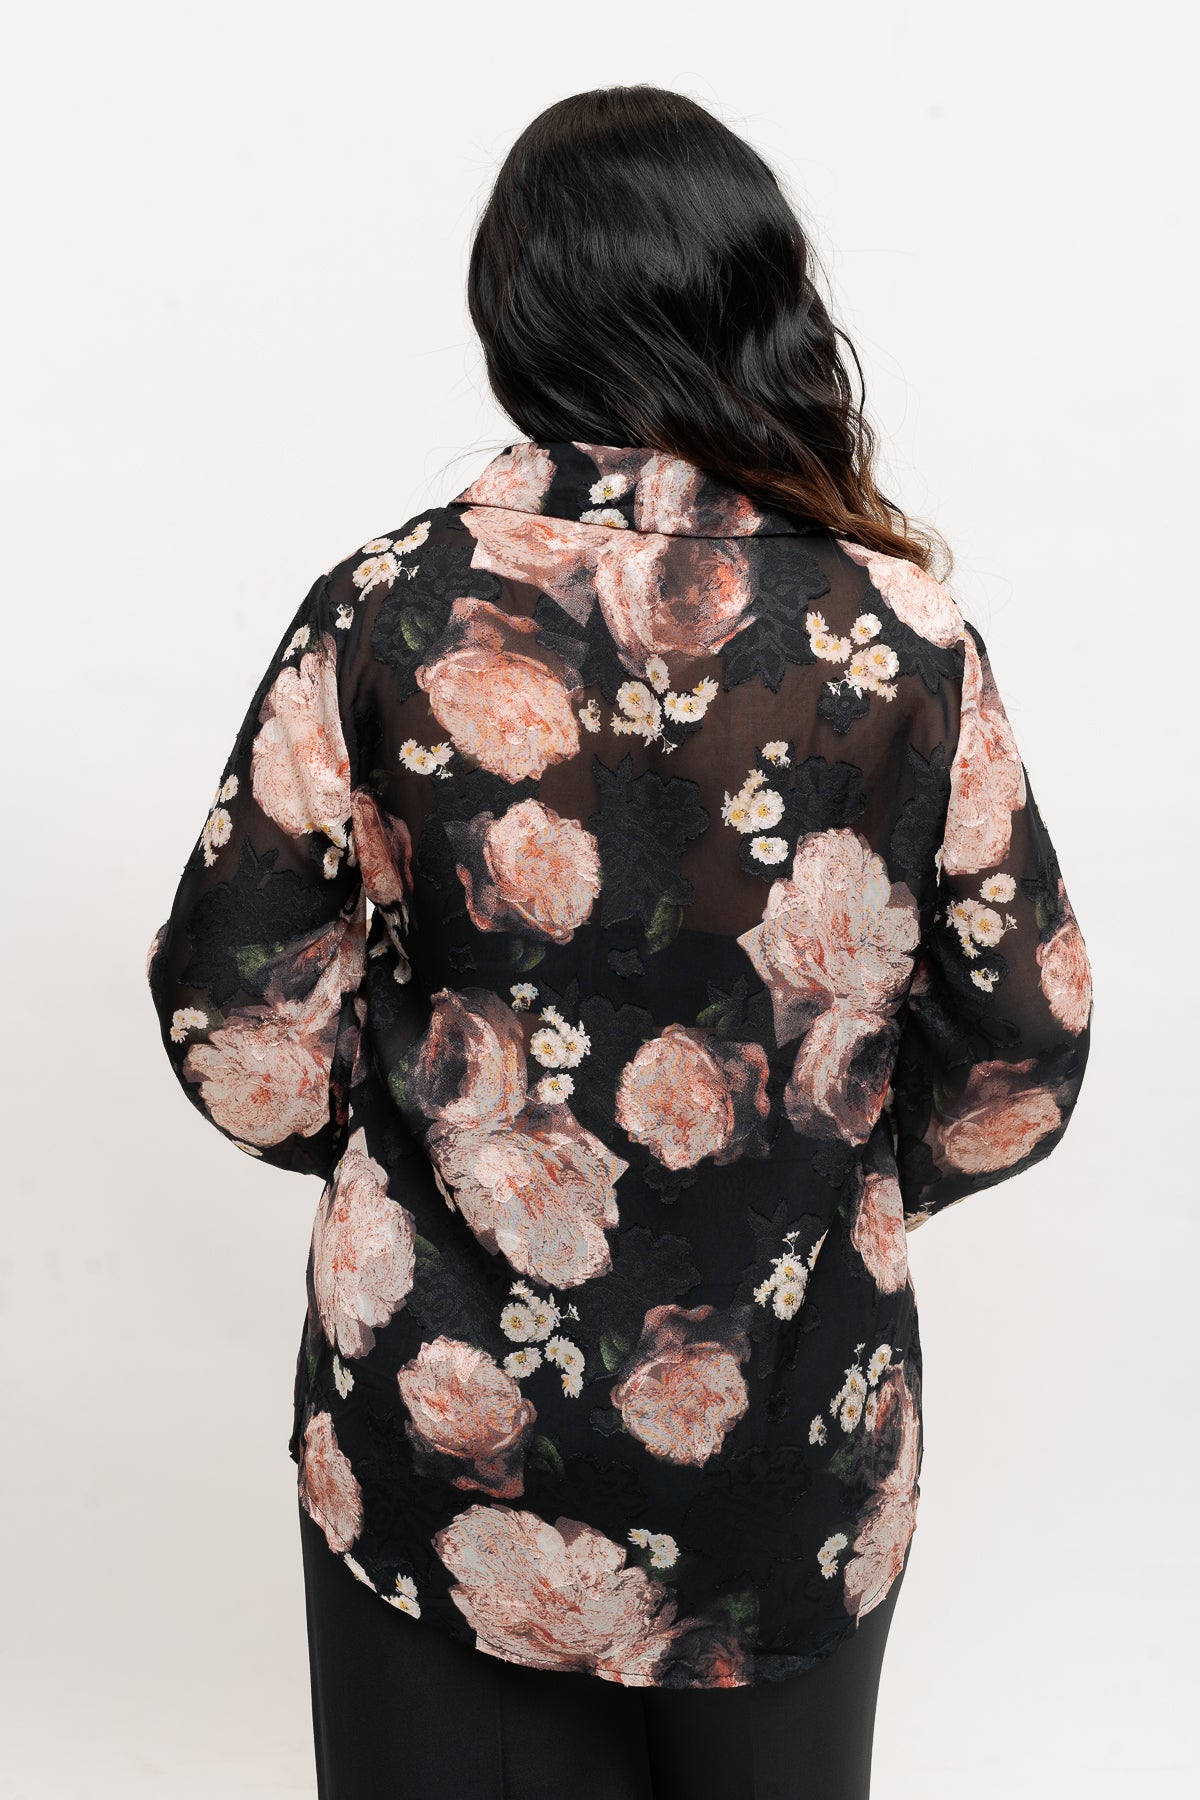 SHEER LACY FLORAL SHIRT